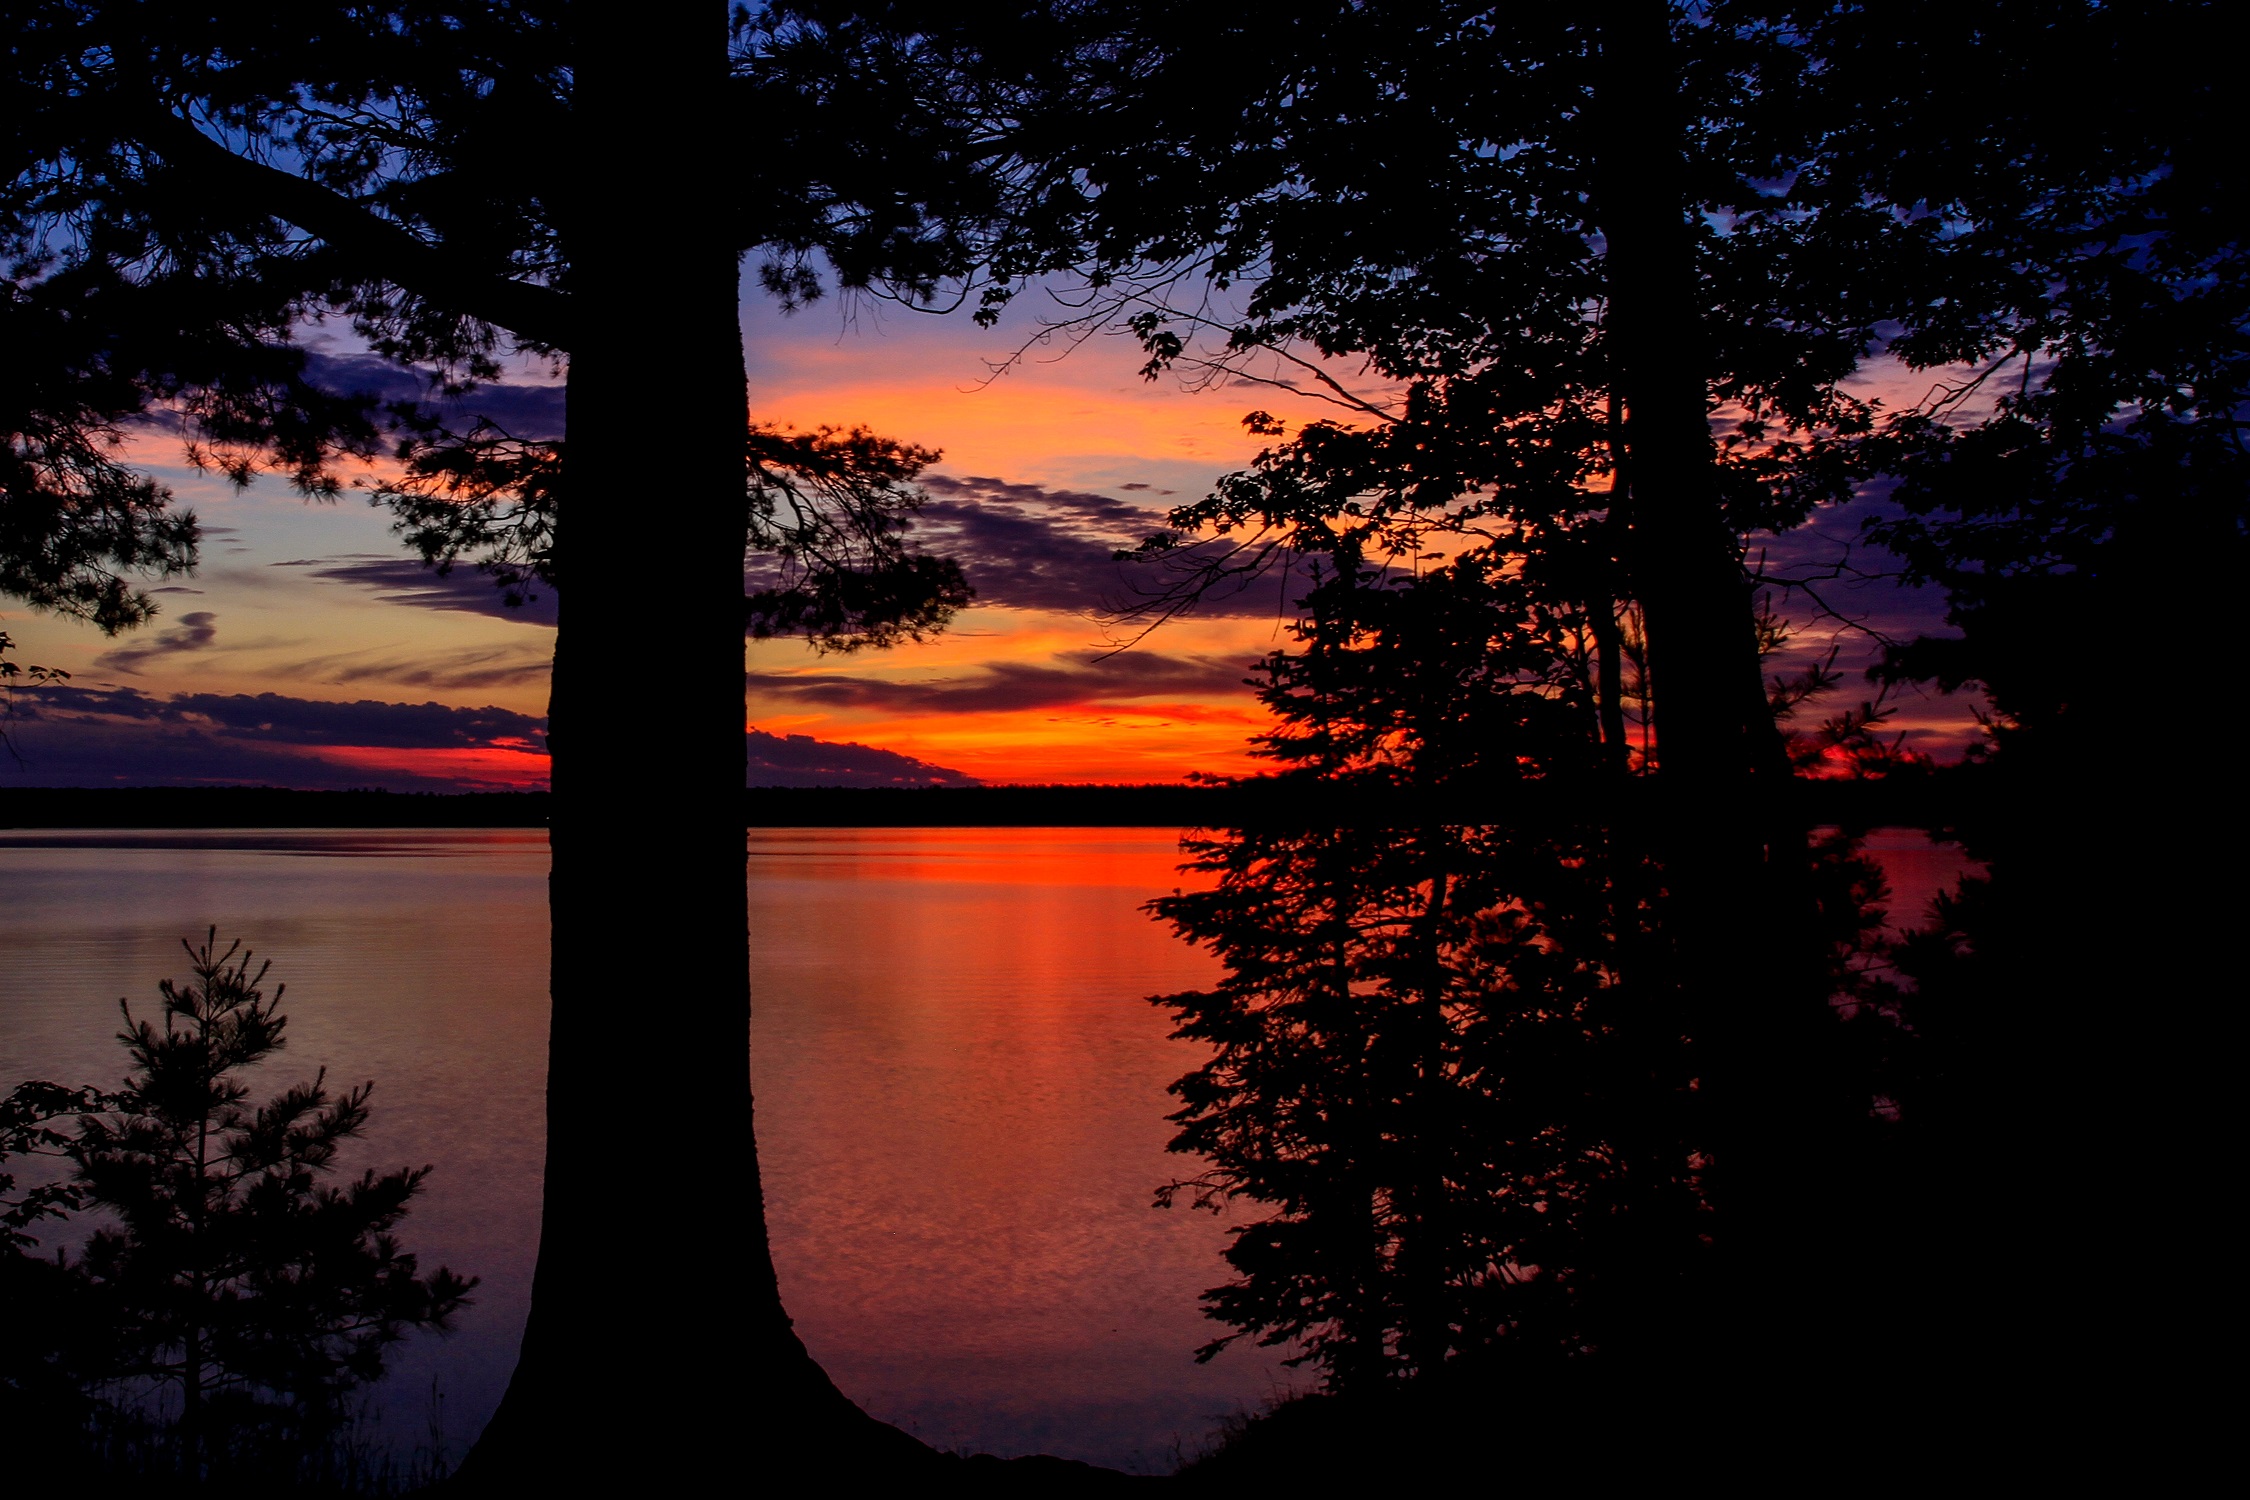 Sunset on a lake in the northwoods of Wisconsin